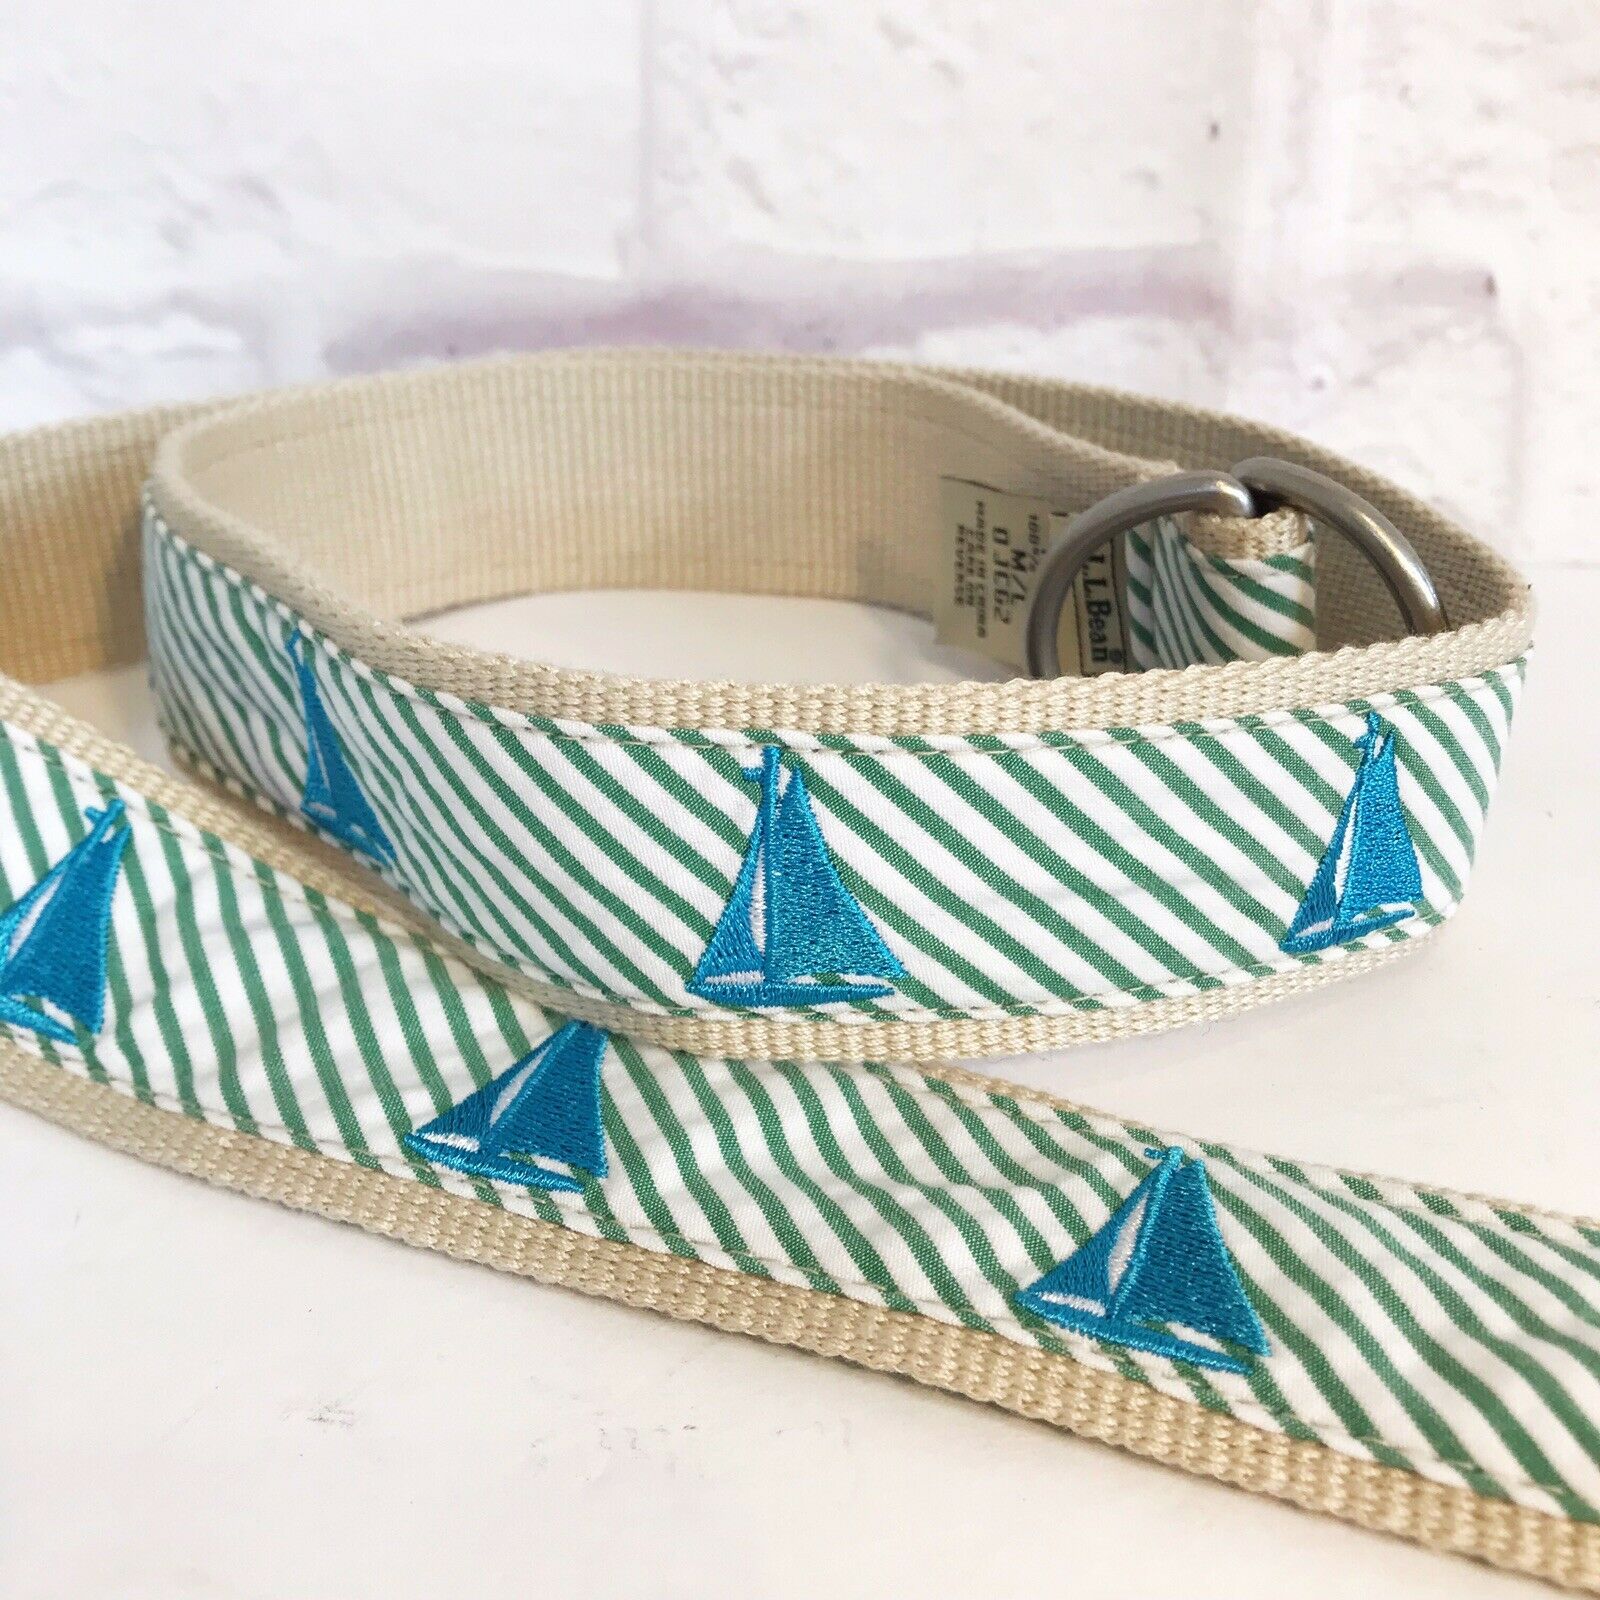 New Ll Bean Seaport Belt Canvas Nautical Embroidered Blue & White Sailboat M / L